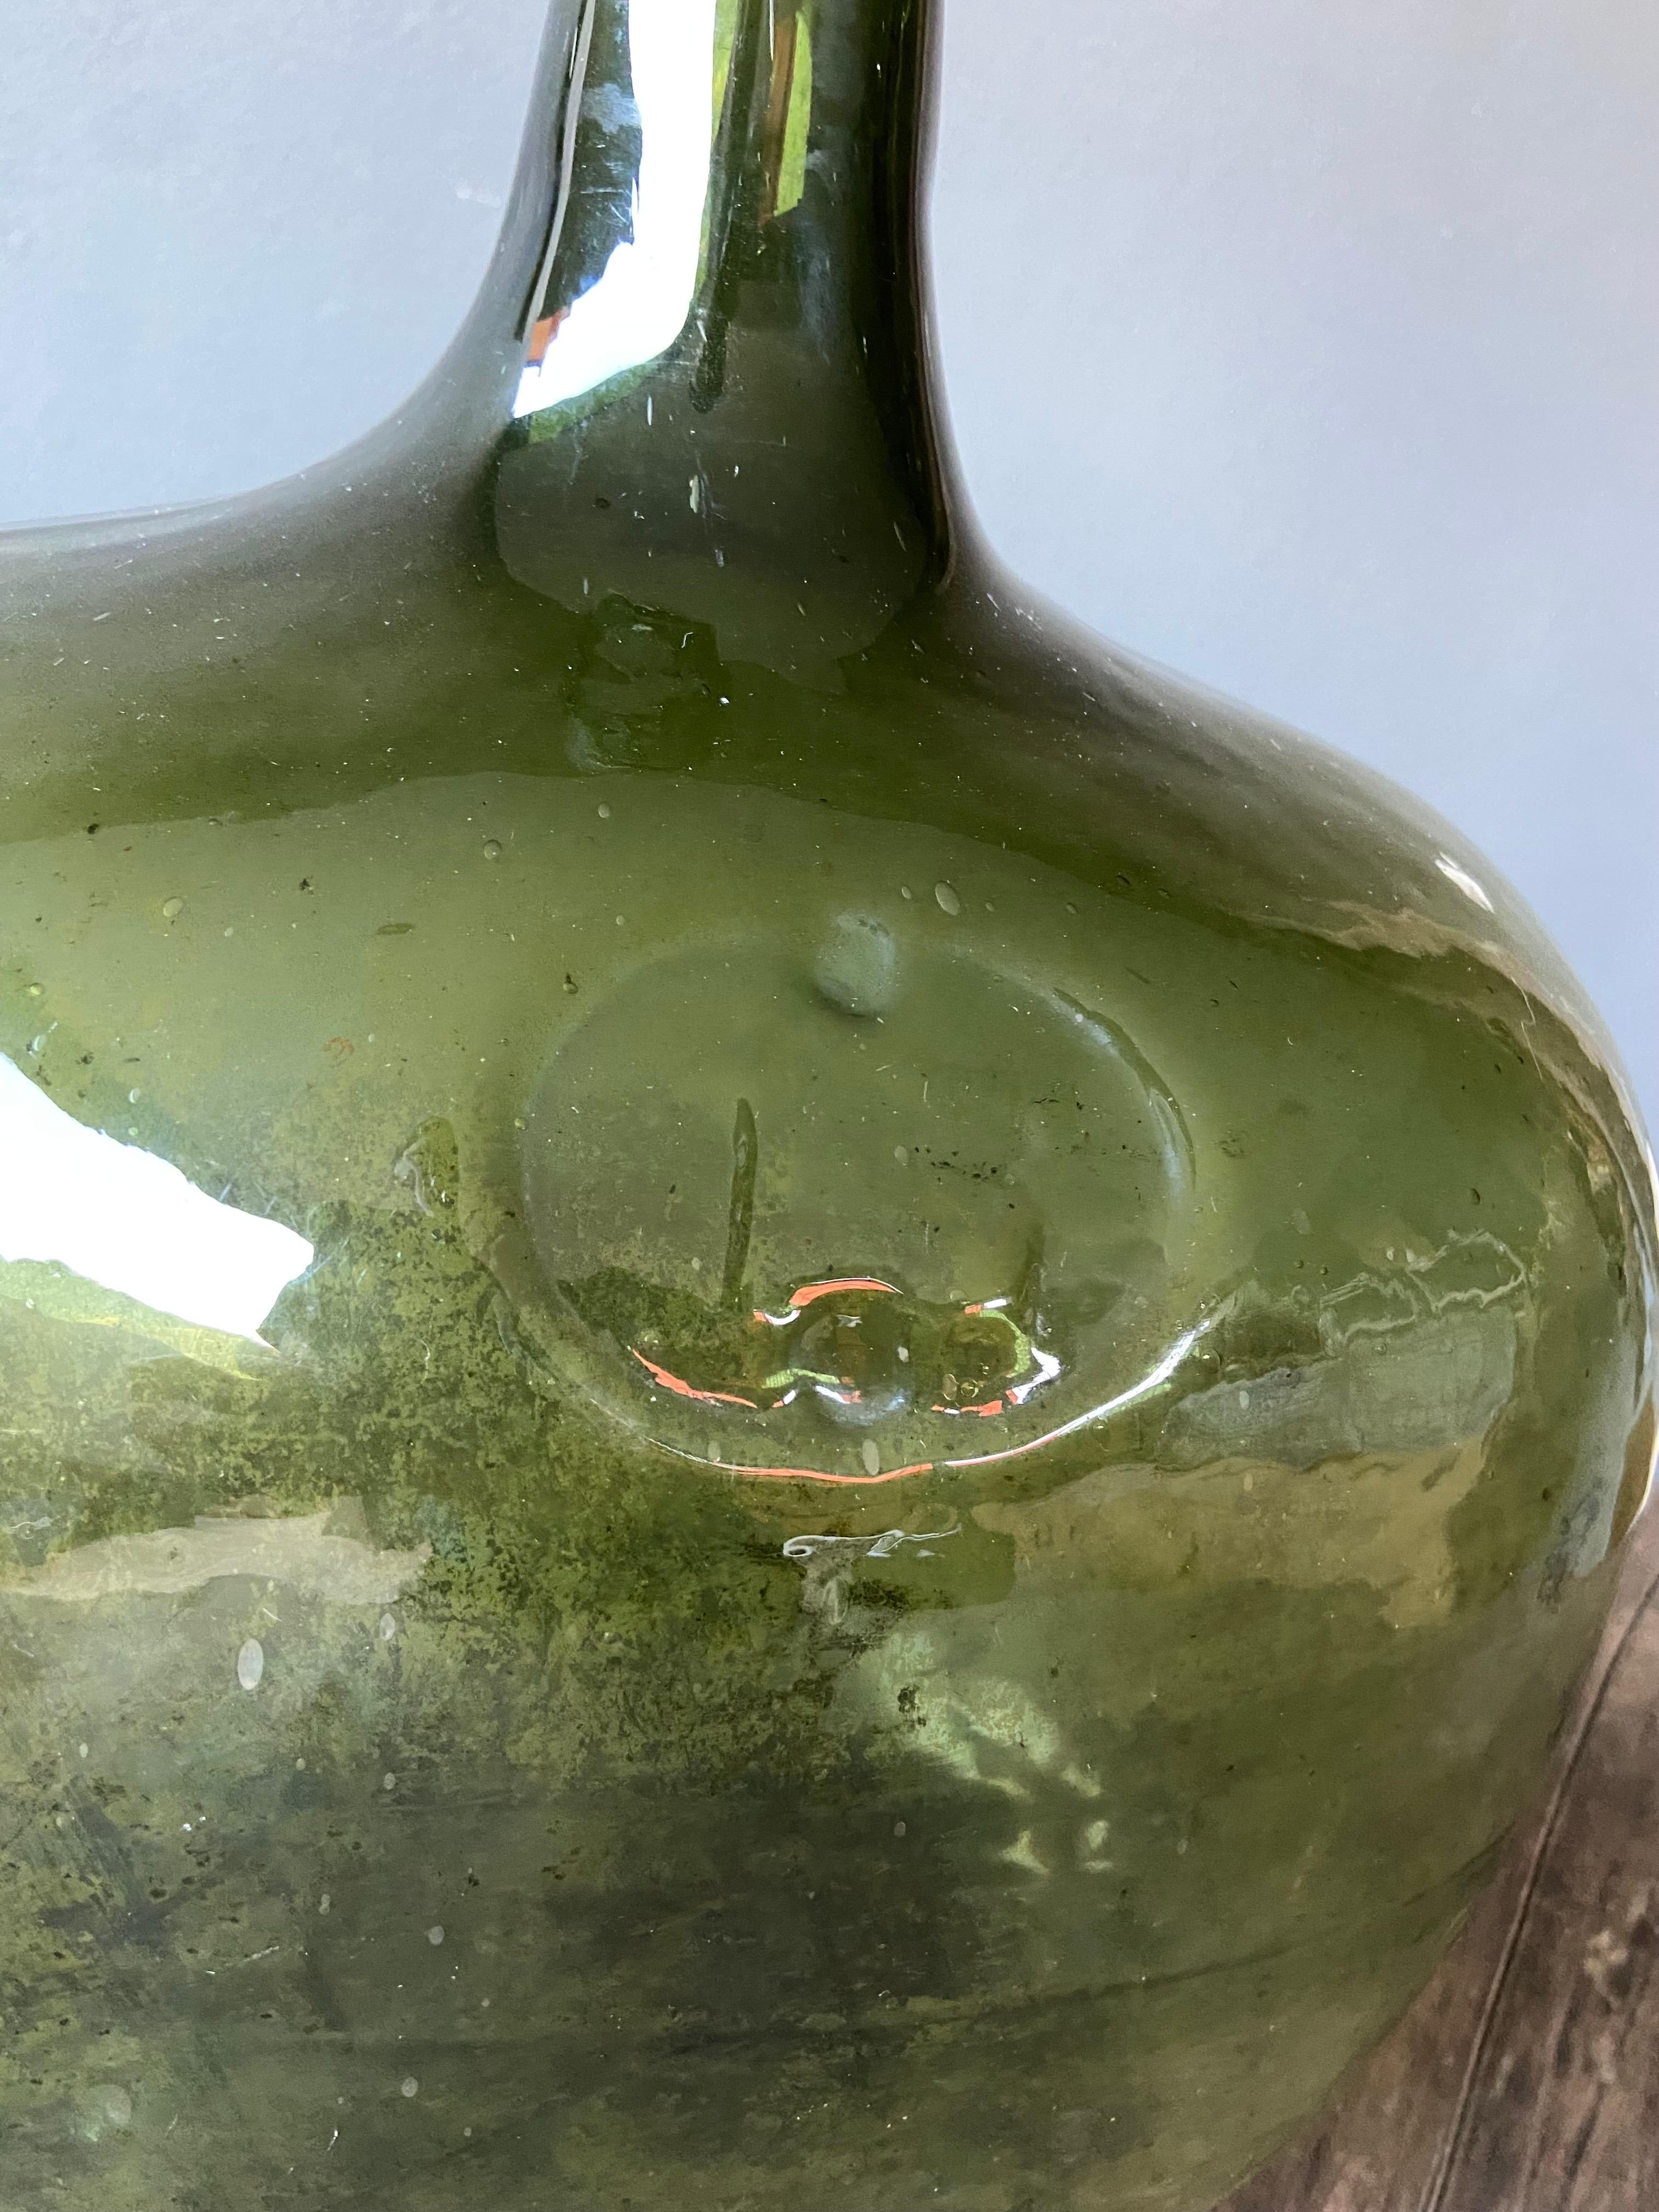 Early 20th century hand-blown demijohn bottle from the border area of Puebla and Oaxaca, Mexico. 17 liter marking formed within the glass.